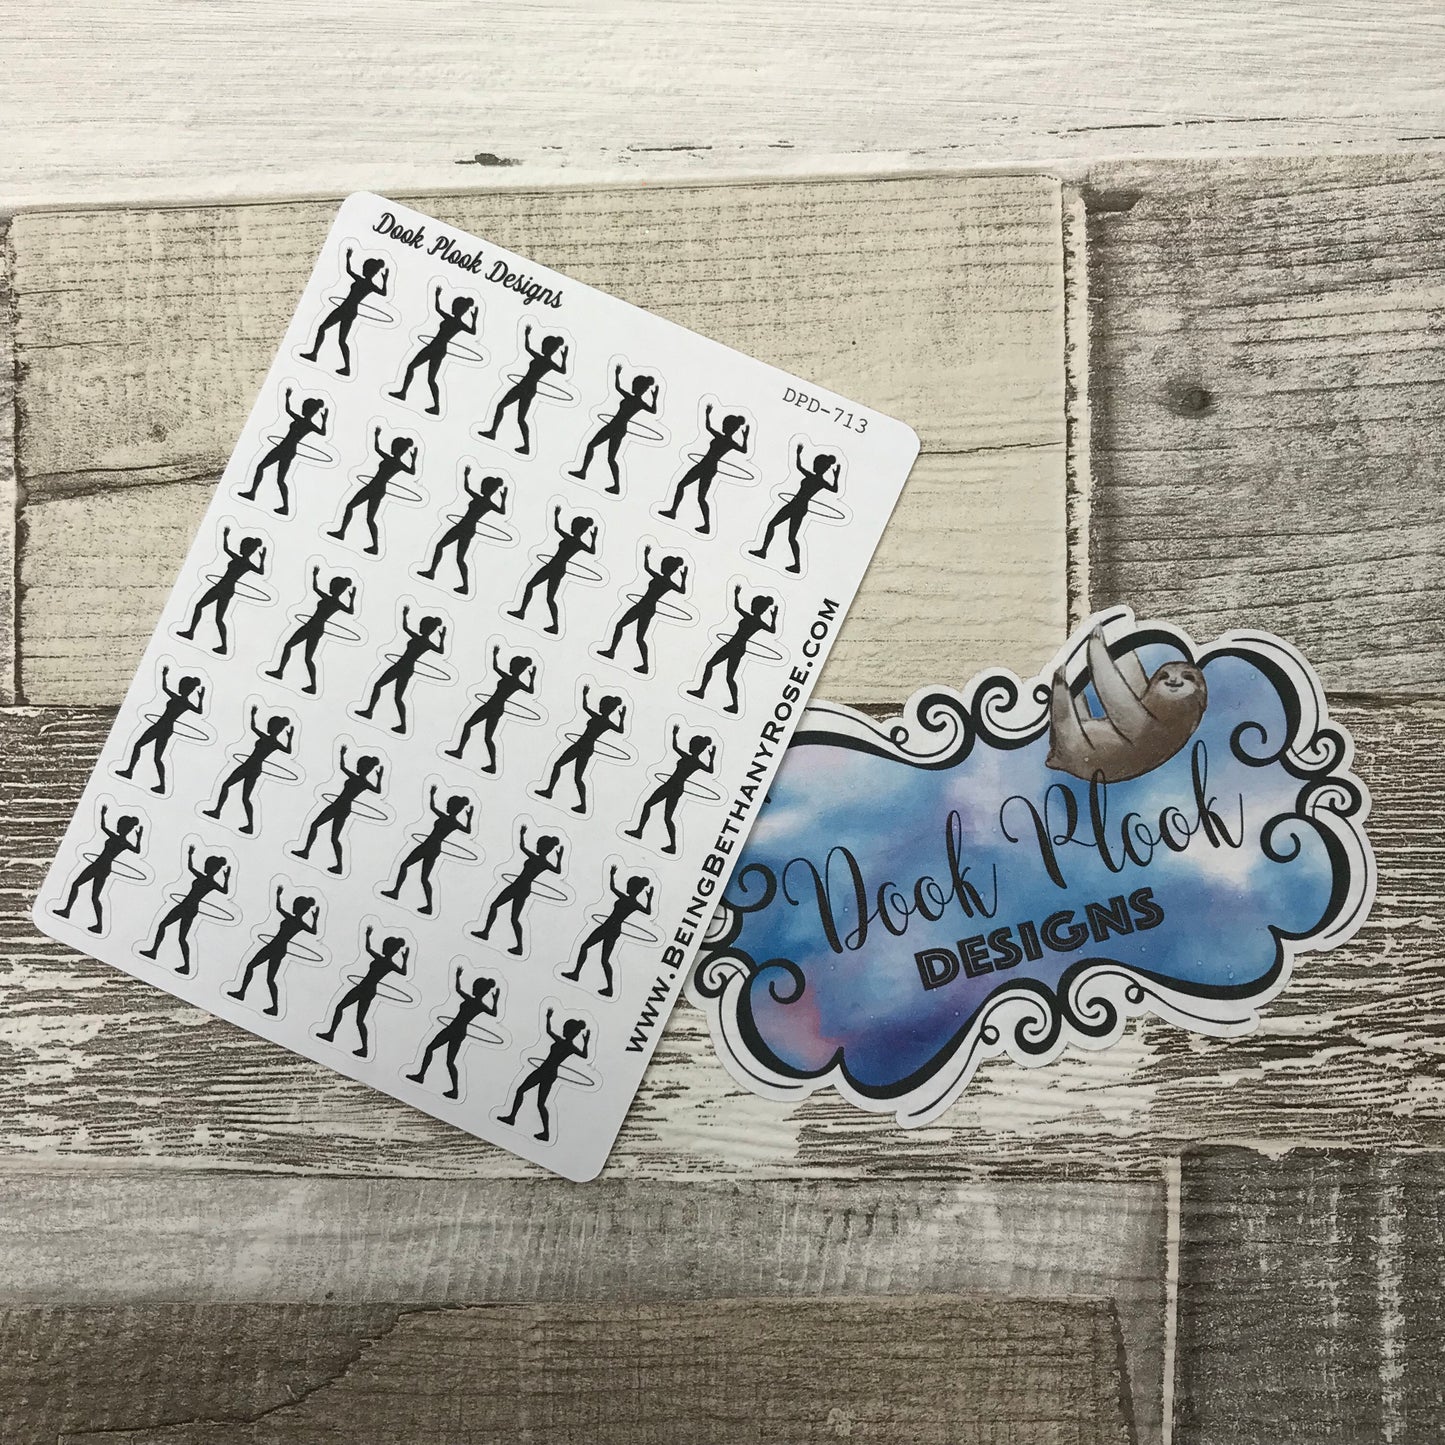 Hula hooping stickers (DPD713)